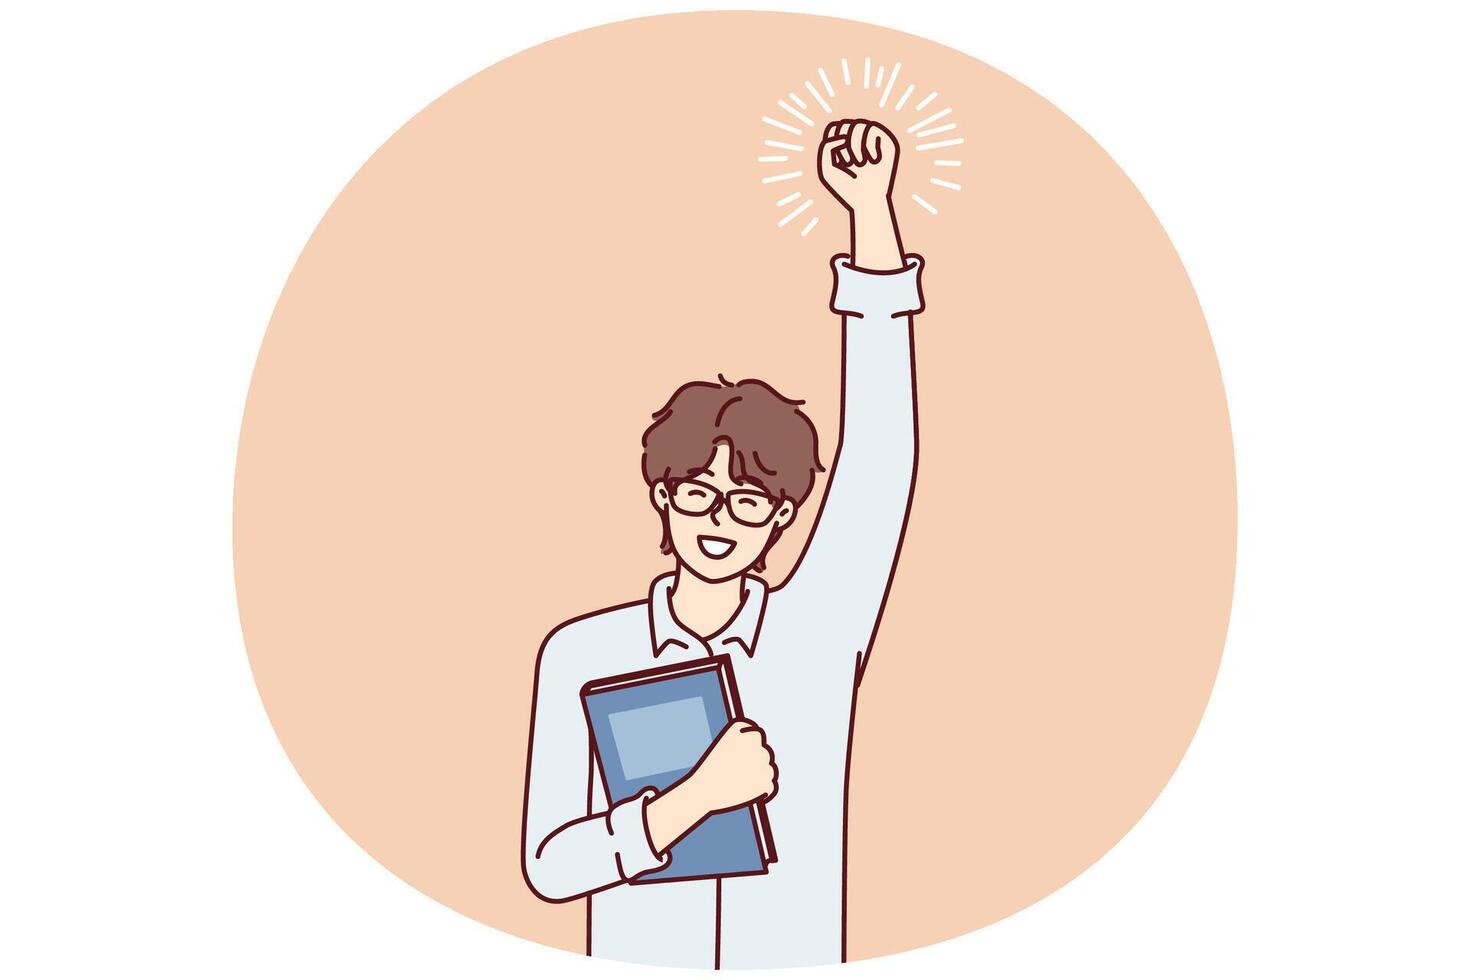 Joyful guy student with textbook in hand makes winning gesture after winning olympiad. Vector image